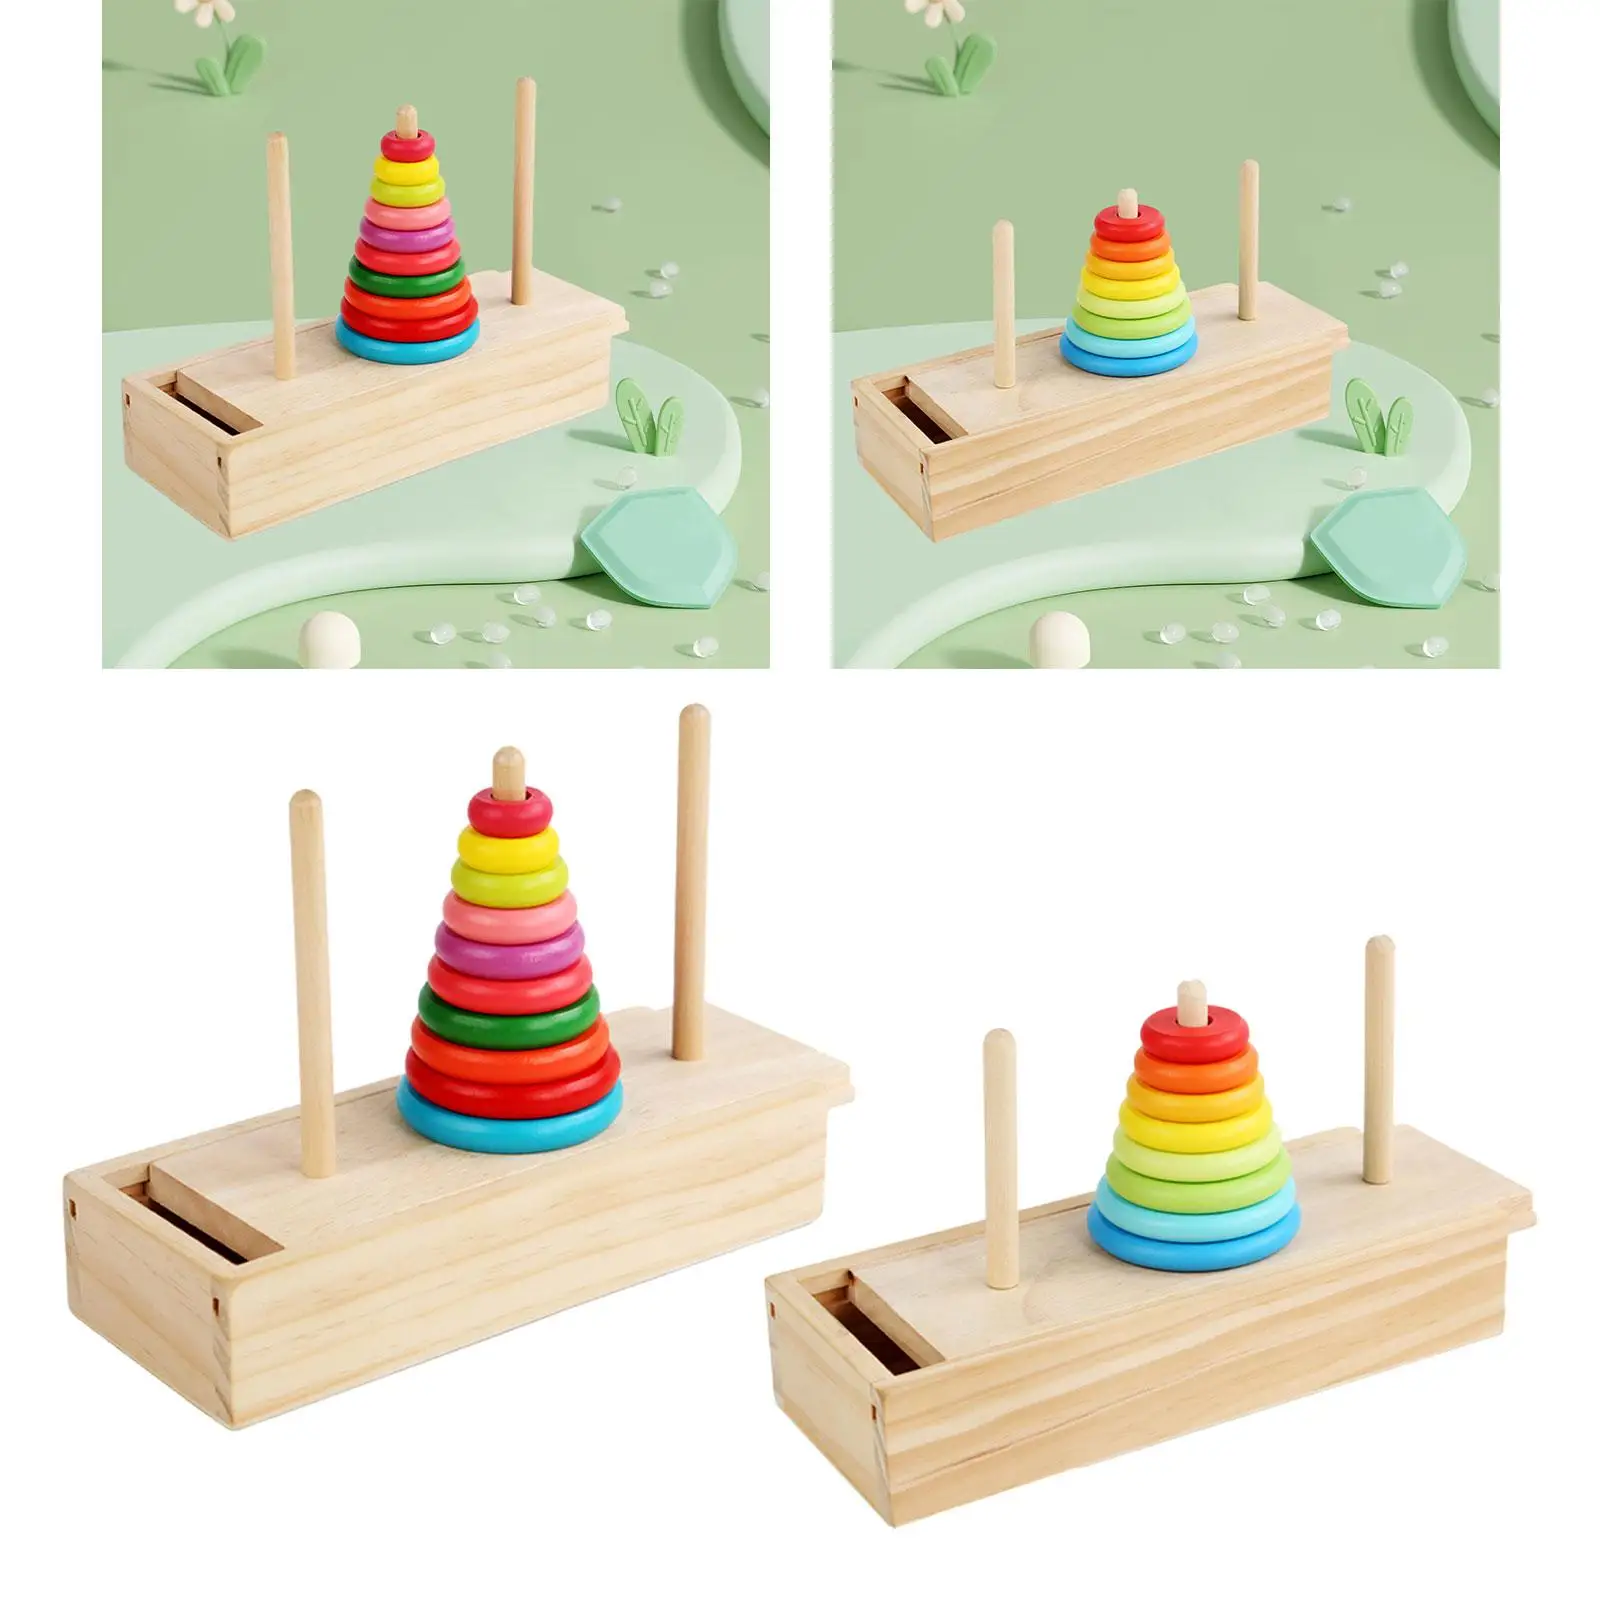 Wooden Stacking Tower Color Cognition Brain Training Toy Intellectual Toy Portable for Baby Kids 3 Year Old and up Boys Girls